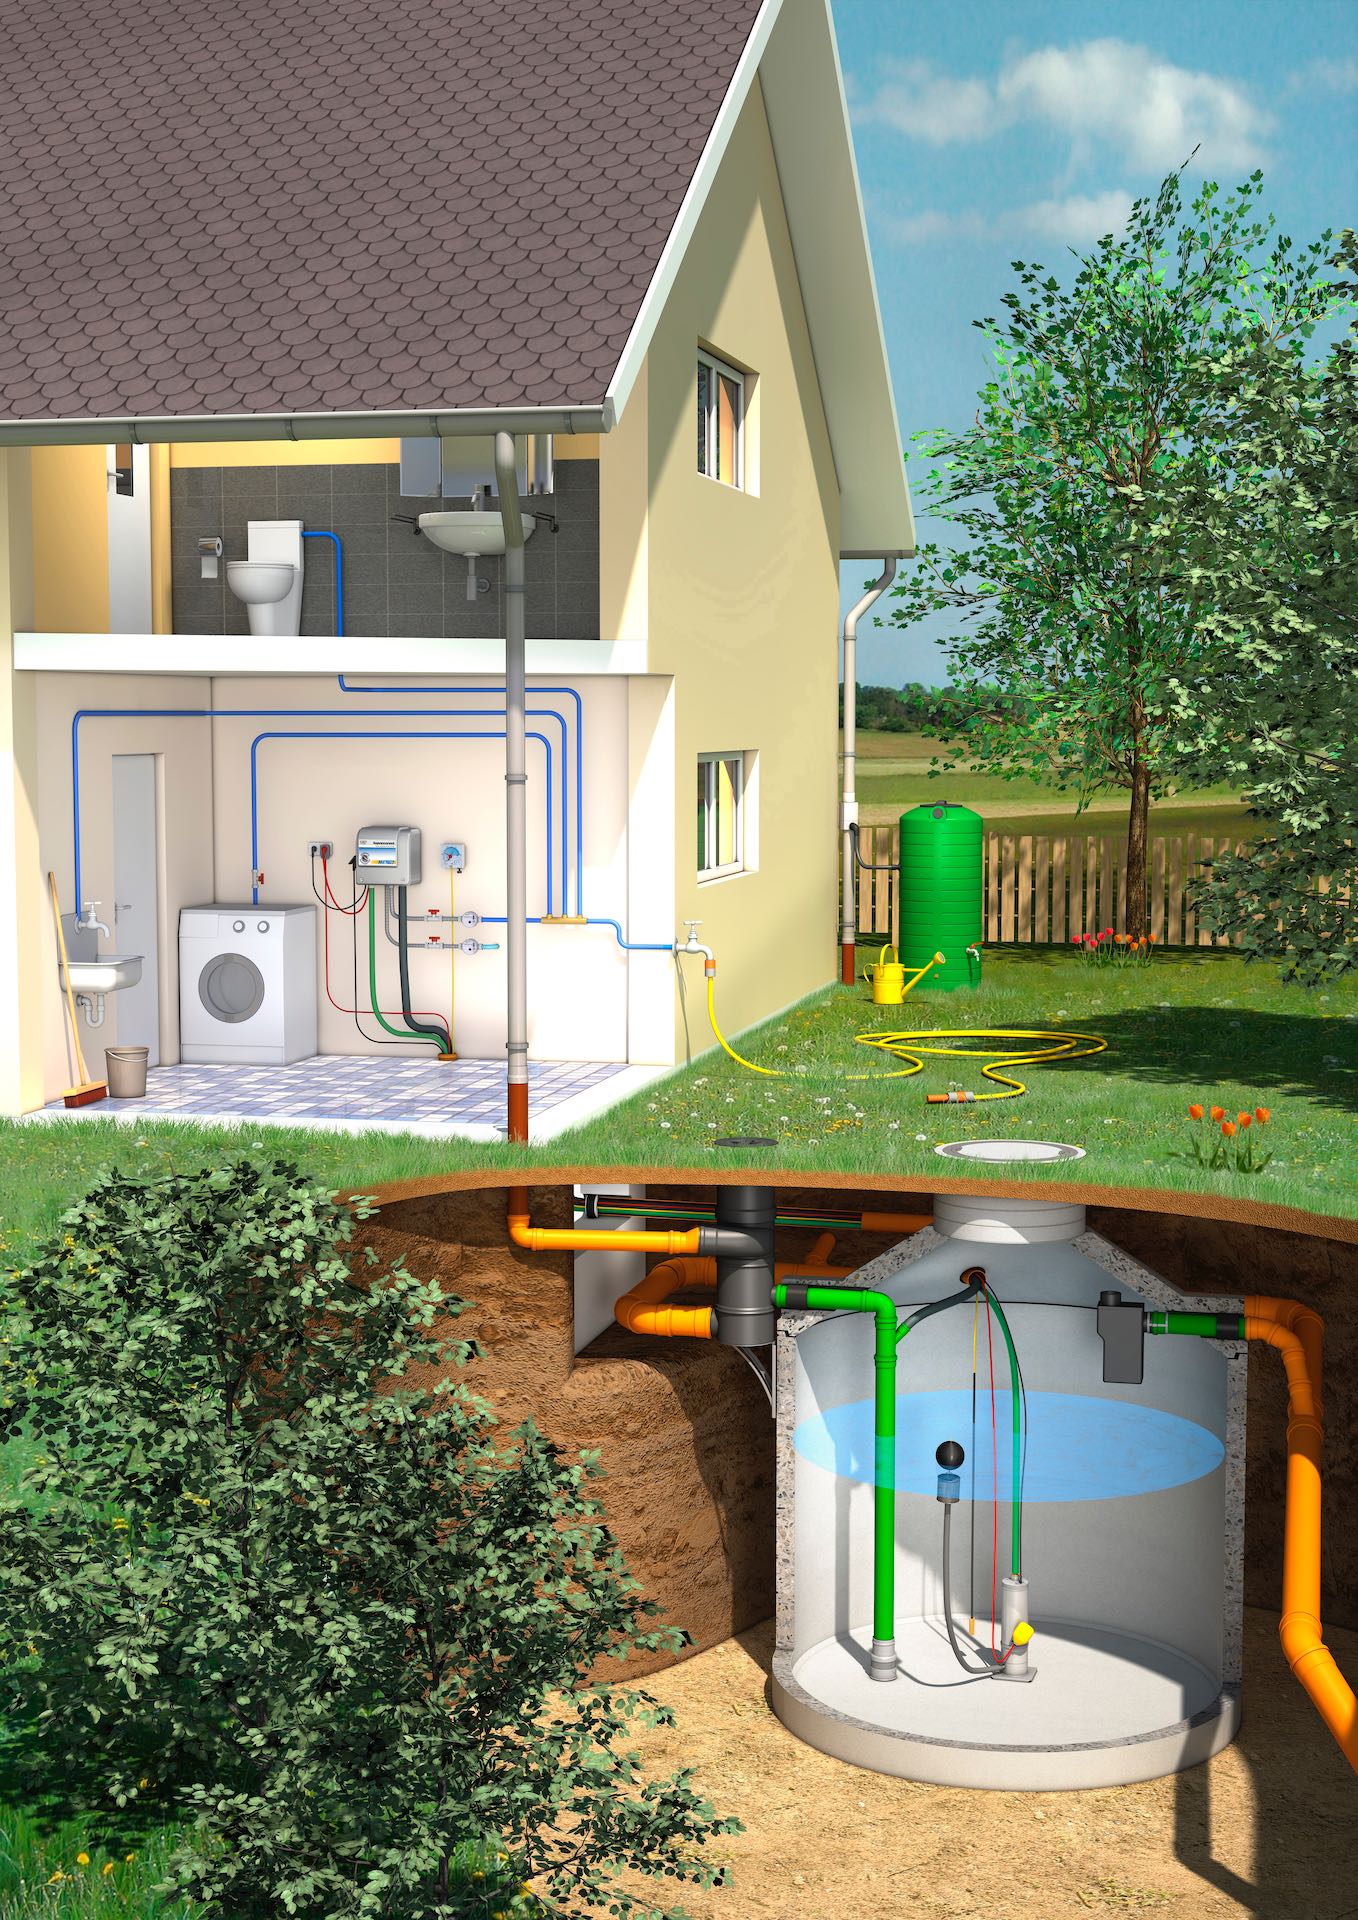 The structure of a rainwater system